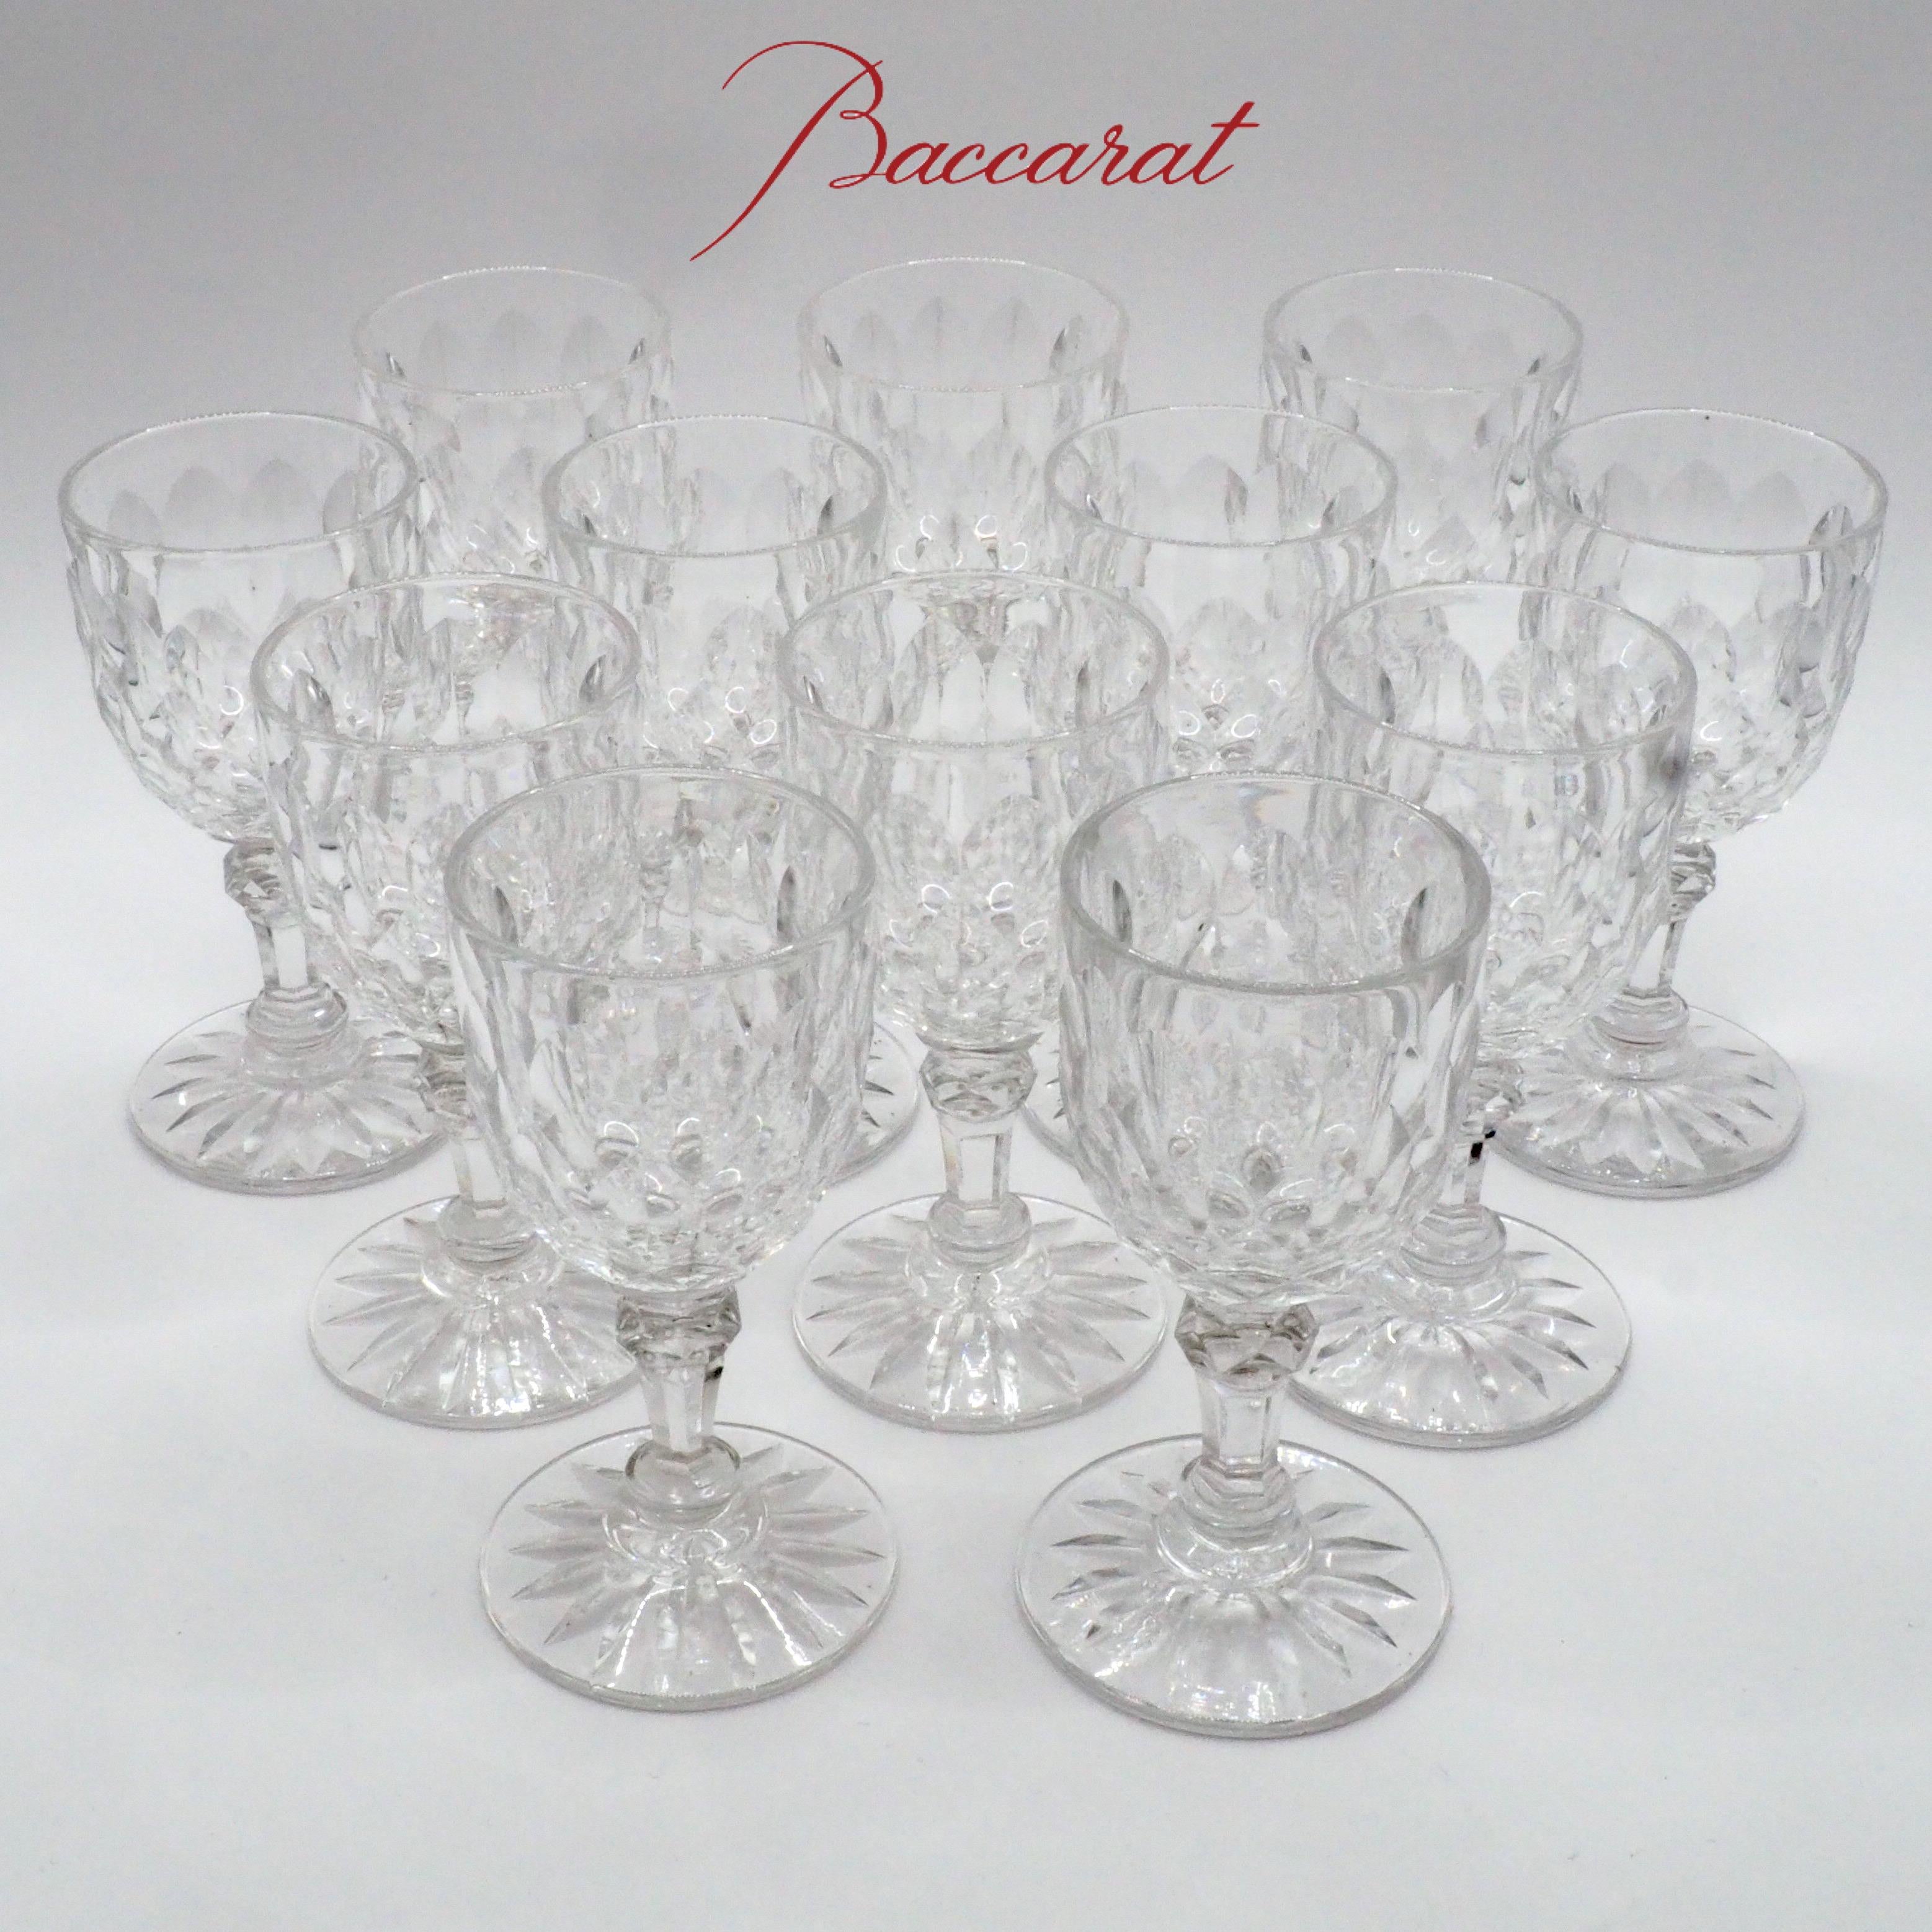 Baccarat crystal liquor set composed of 12 glasses, Juvisy pattern.

Juvisy was created in 1867 for Paris universal exhibition. Its success led late 19th century French President to choose Juvisy pattern as the official drinking service for the